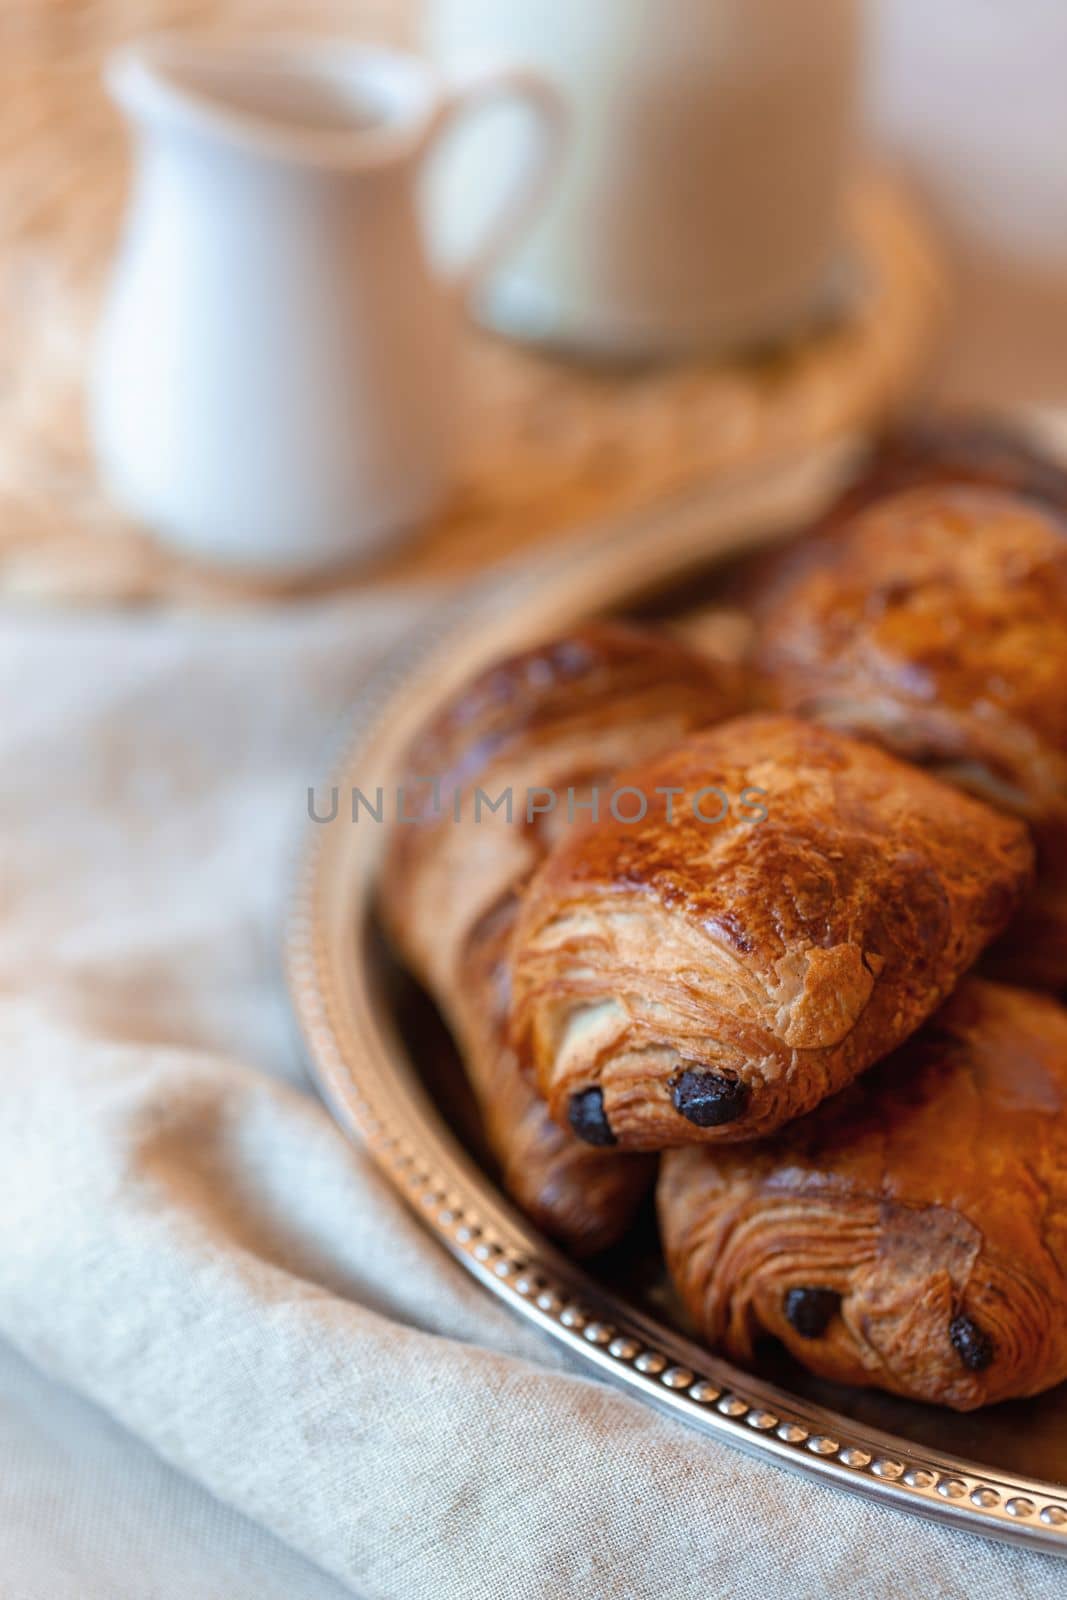 Pain au chocolat, french sweet pastry speciality by lanych